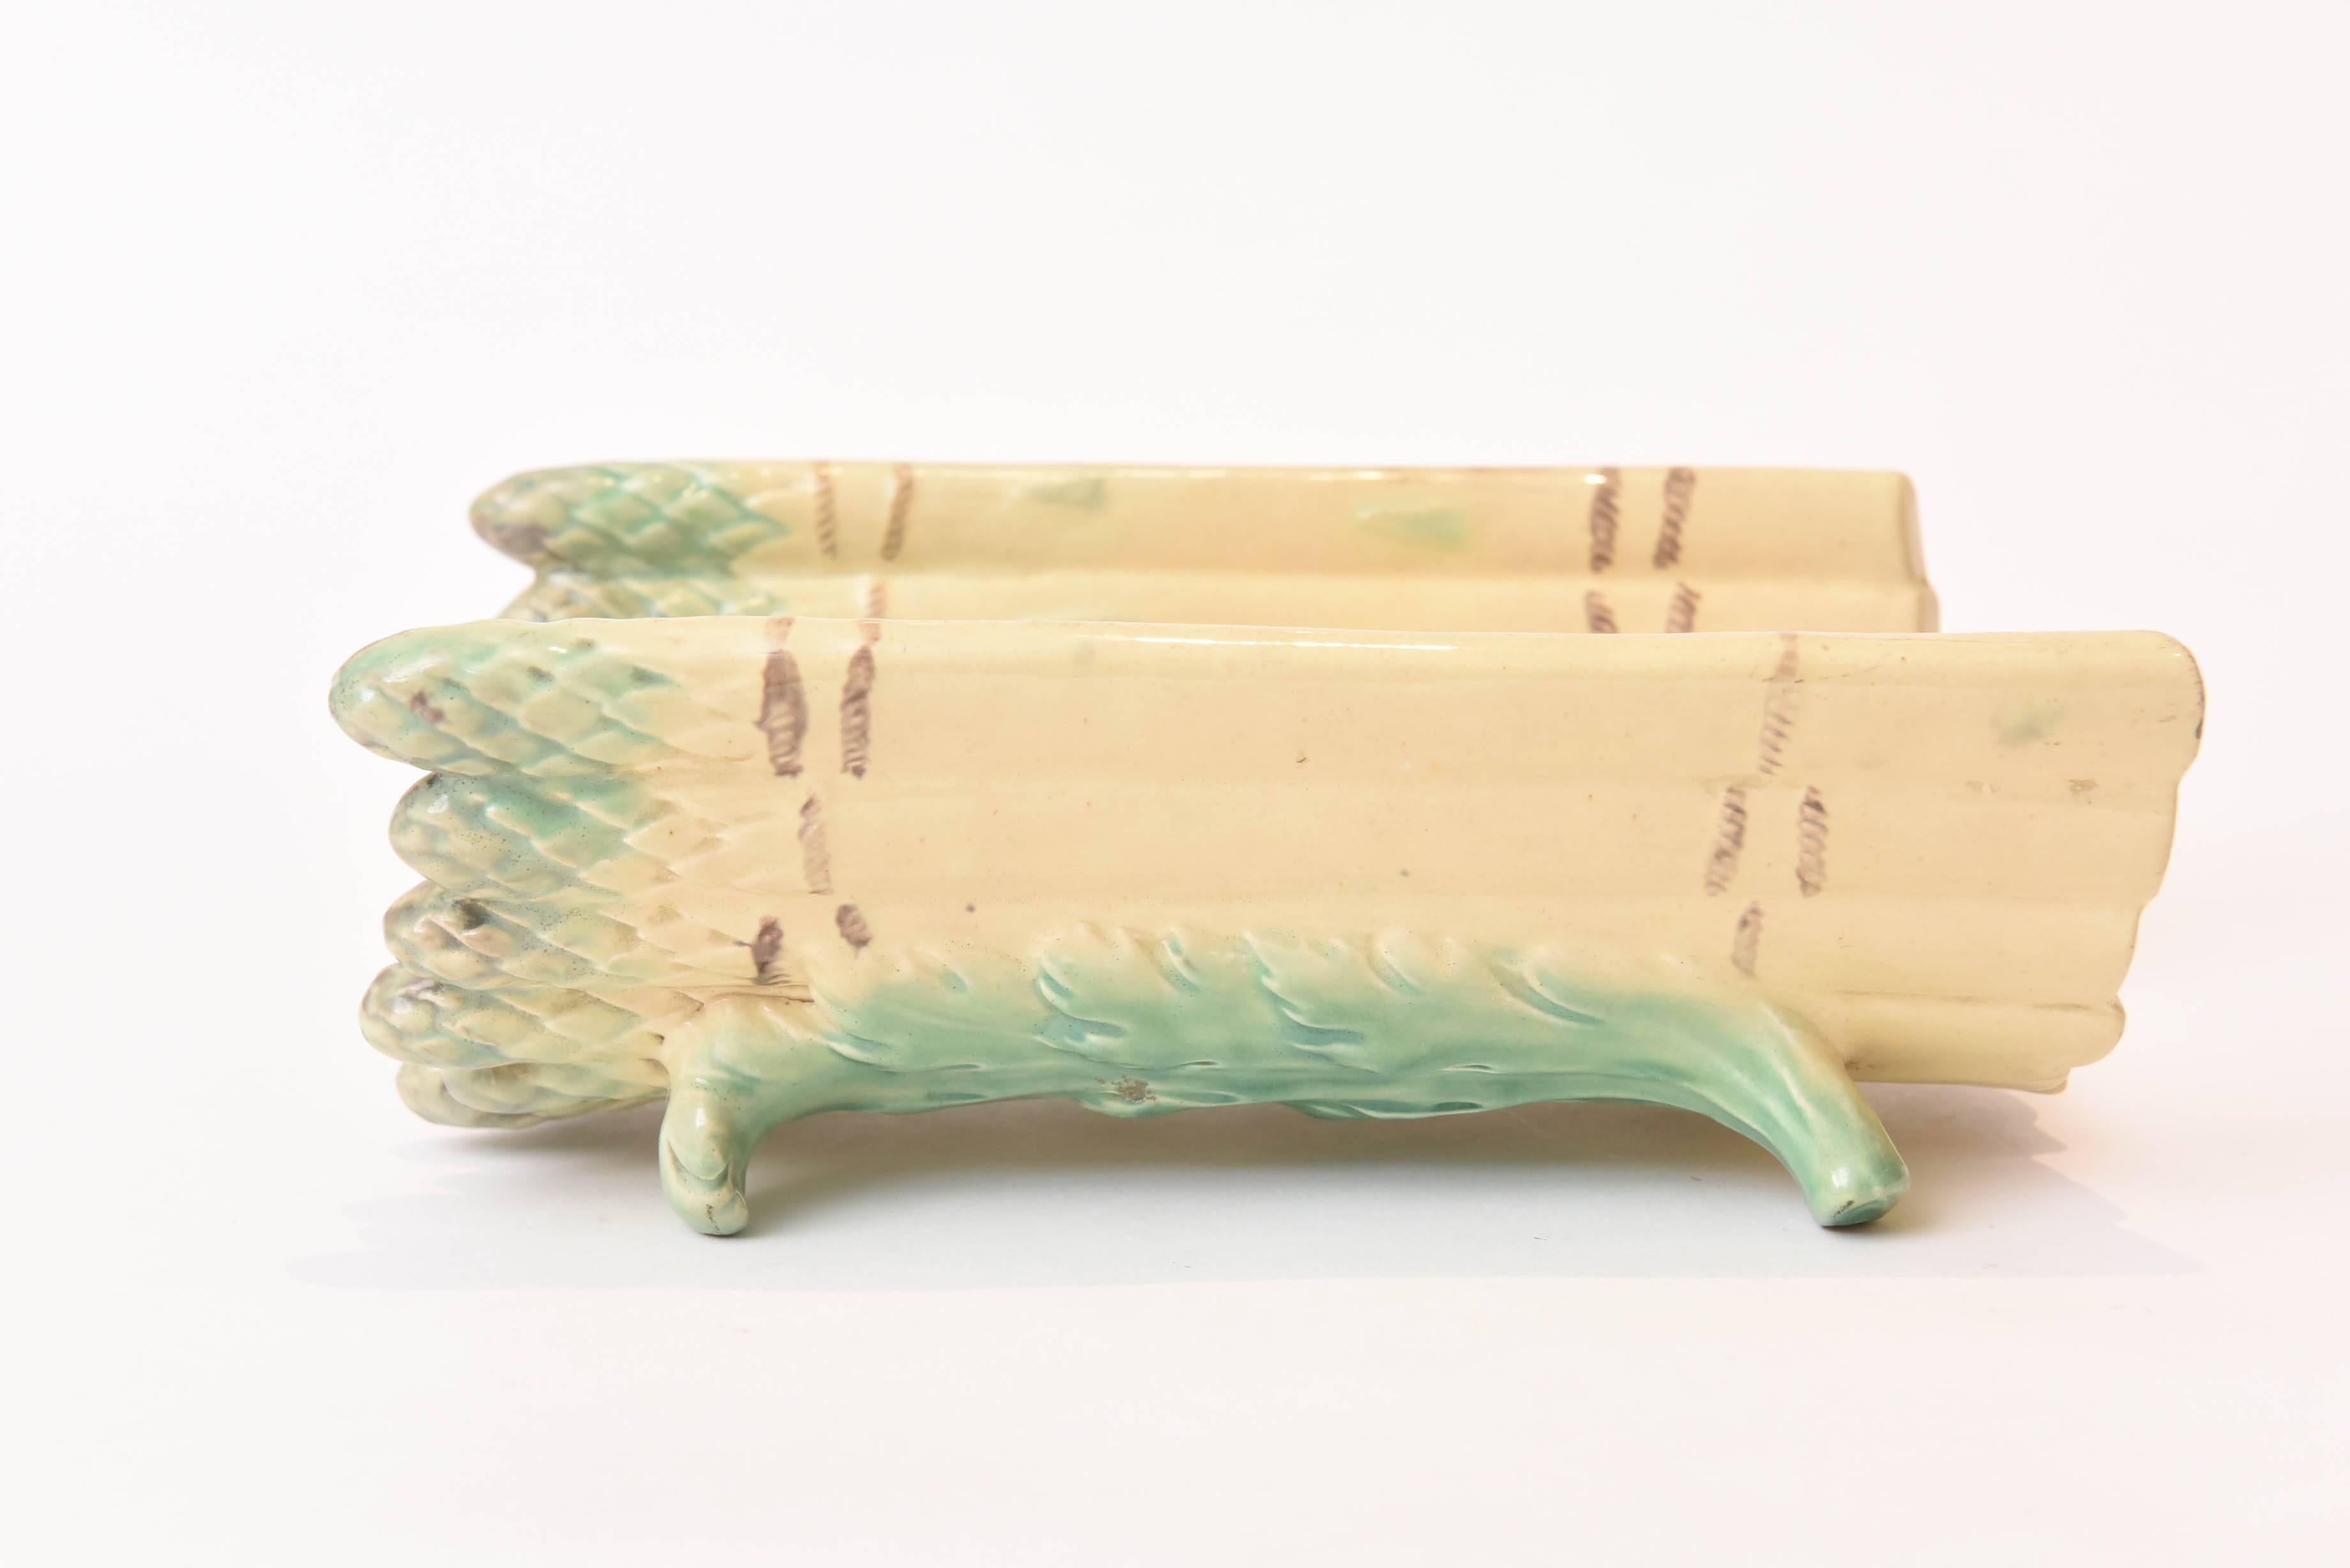 A charming French hand-painted Majolica asparagus server with realistic colors and nicely detailed molding. Perfect for display or for serving. We cannot find a hallmark but attribute to one of the French factories of the last quarter 19th century.